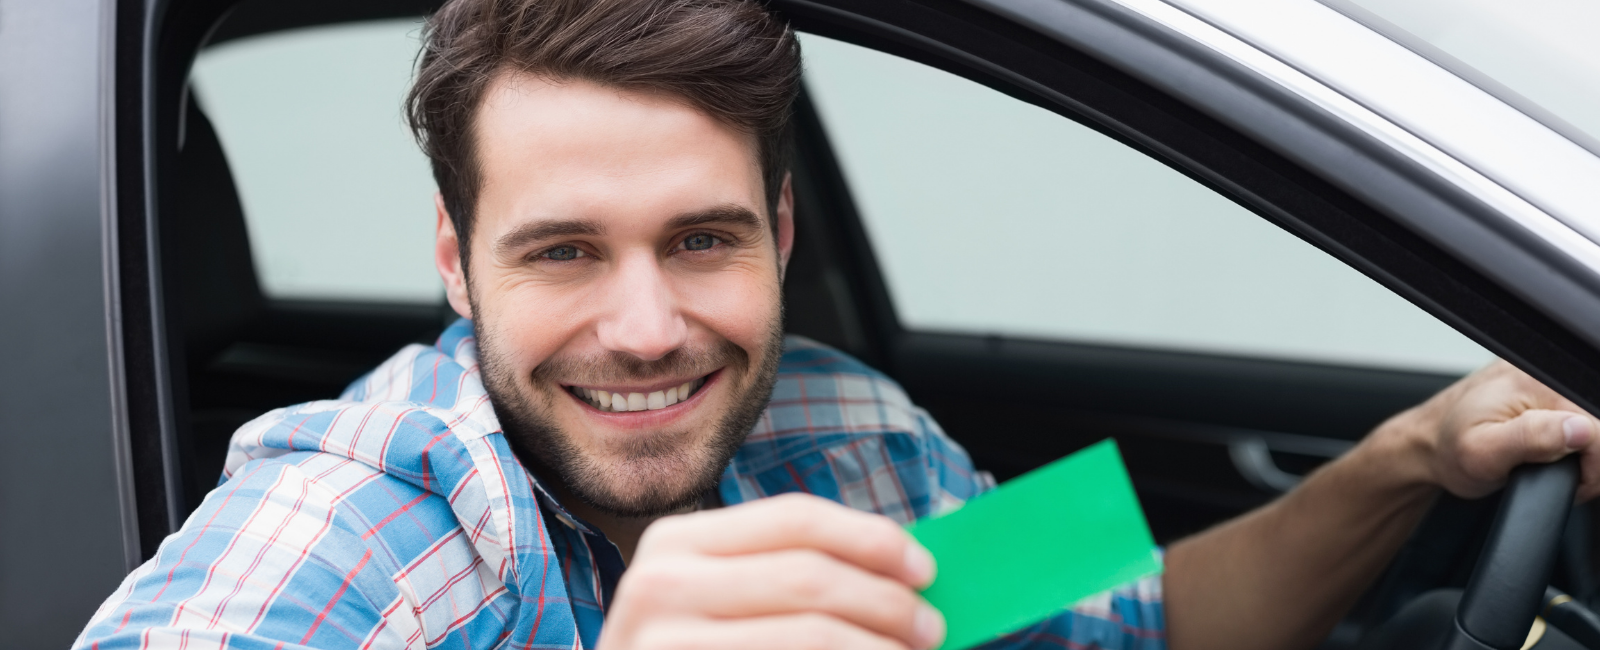 Photo of a man in a car showing his landfill card